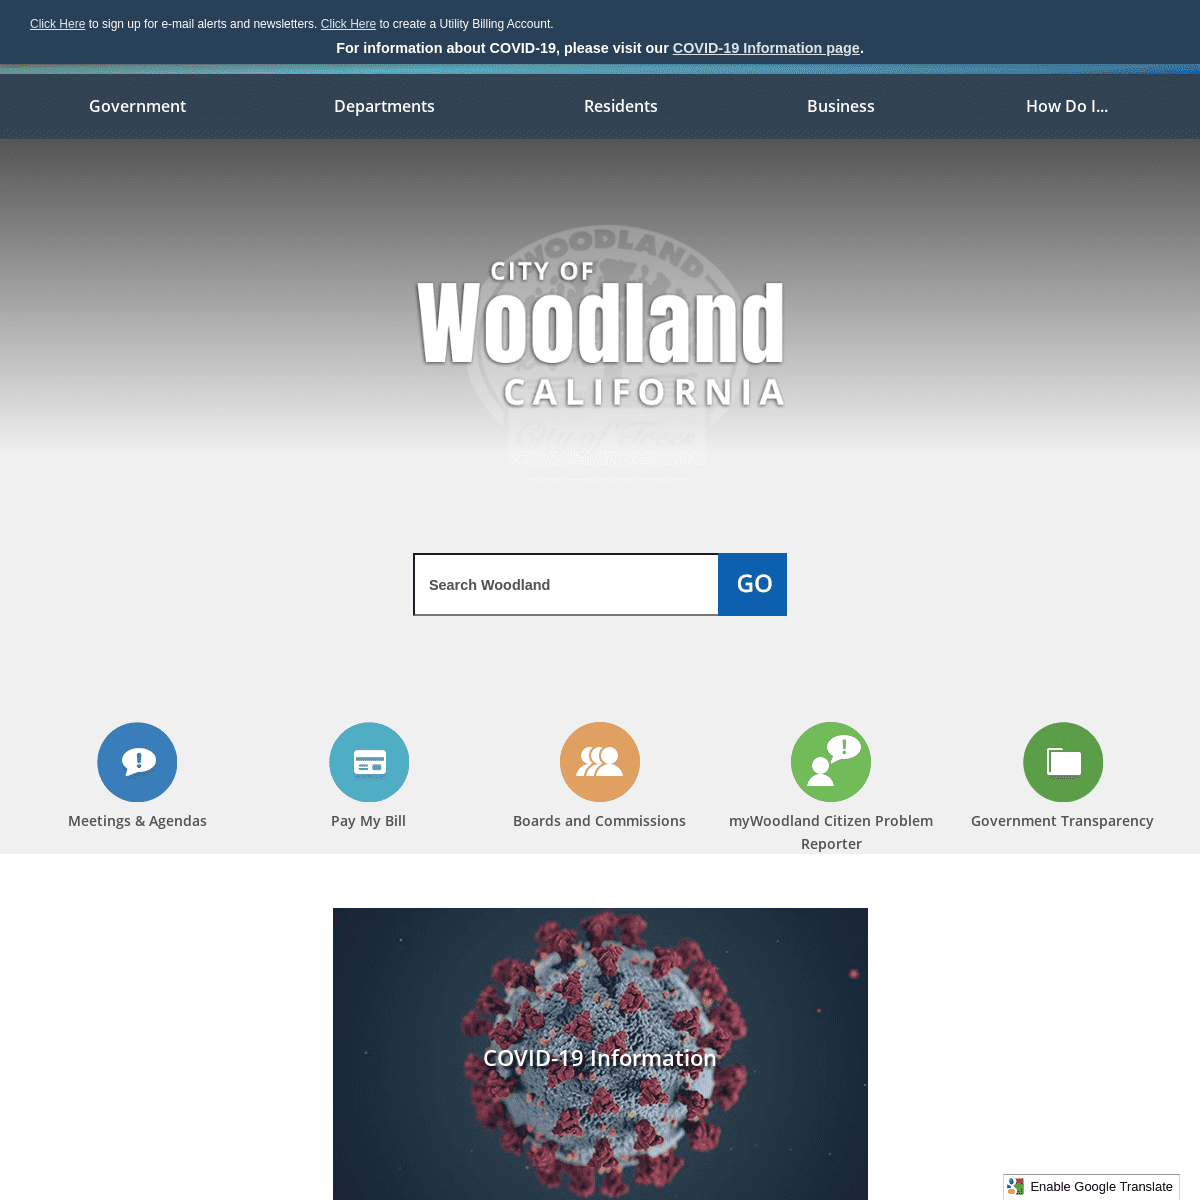 A complete backup of https://cityofwoodland.org